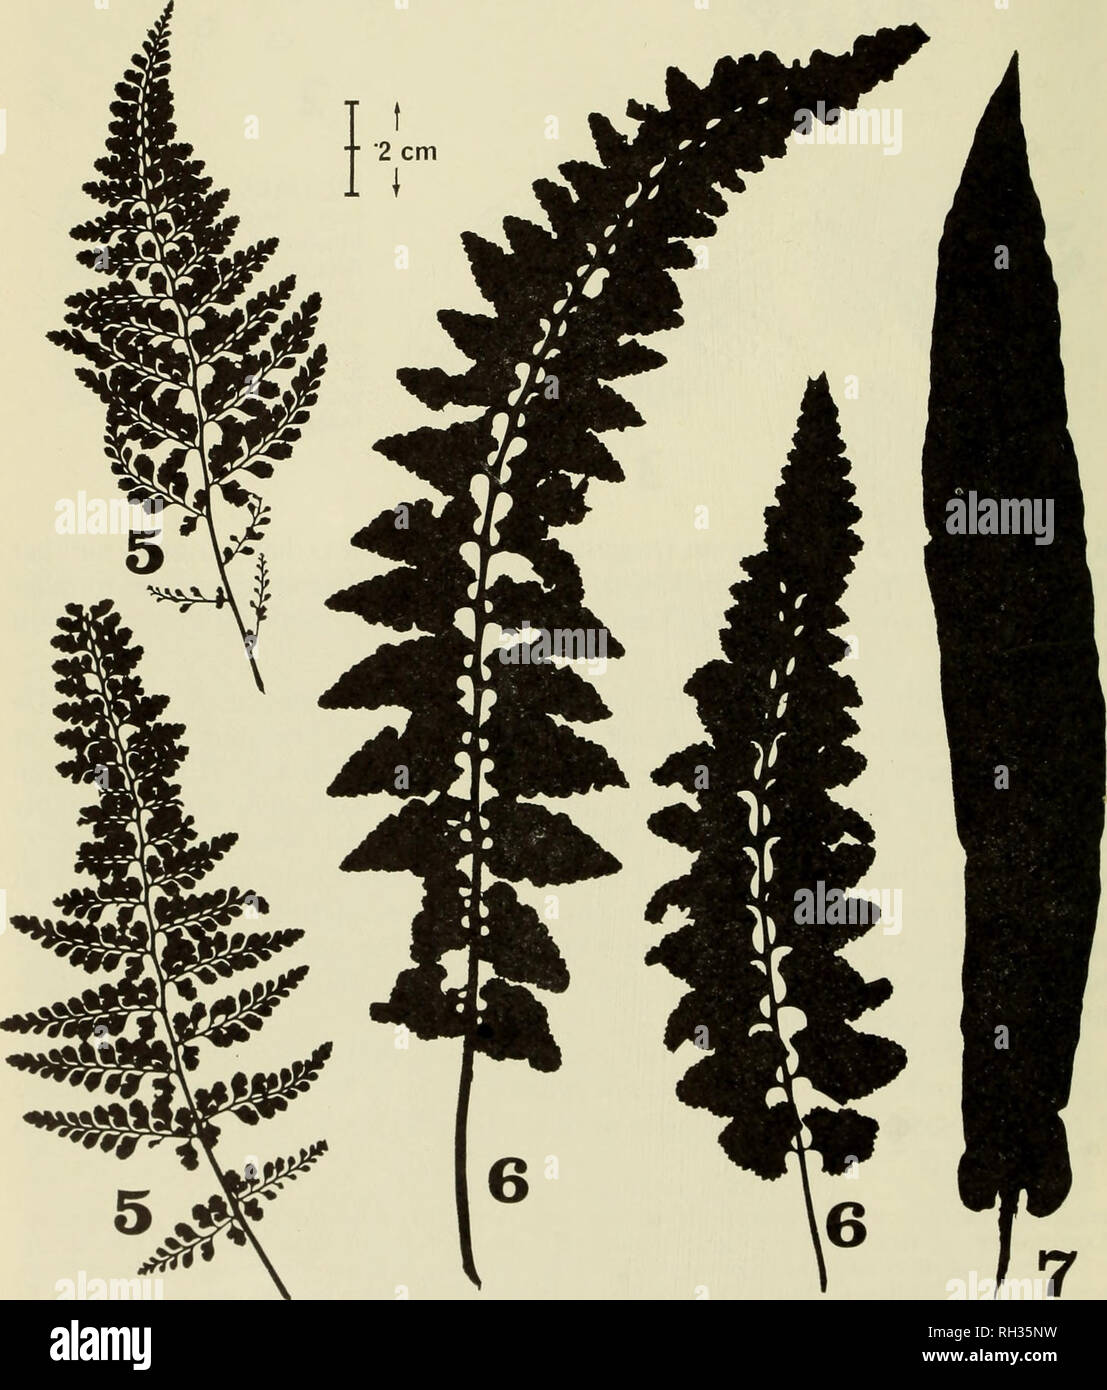 . The British fern gazette. Ferns. 6 BRITISH FERN GAZETTE: VOLUME 10PART 1(1968) not materially assist in resolving the problem of the identity of the Asplenium parent of this hybrid because A. adiantum-nigrum and A. billotii are both tetraploid species. However, in the light of what is already known, through the efforts of Dr Molly Walker and Dr Anne Sleep, regarding the origins of A. adiantum- nigrum and A. billotii, the occurrence of a high degree of pairing between the chromosome sets contributed to x Asplenophyllitis microdon by its Asplenium parent does make it very much more probable th Stock Photo